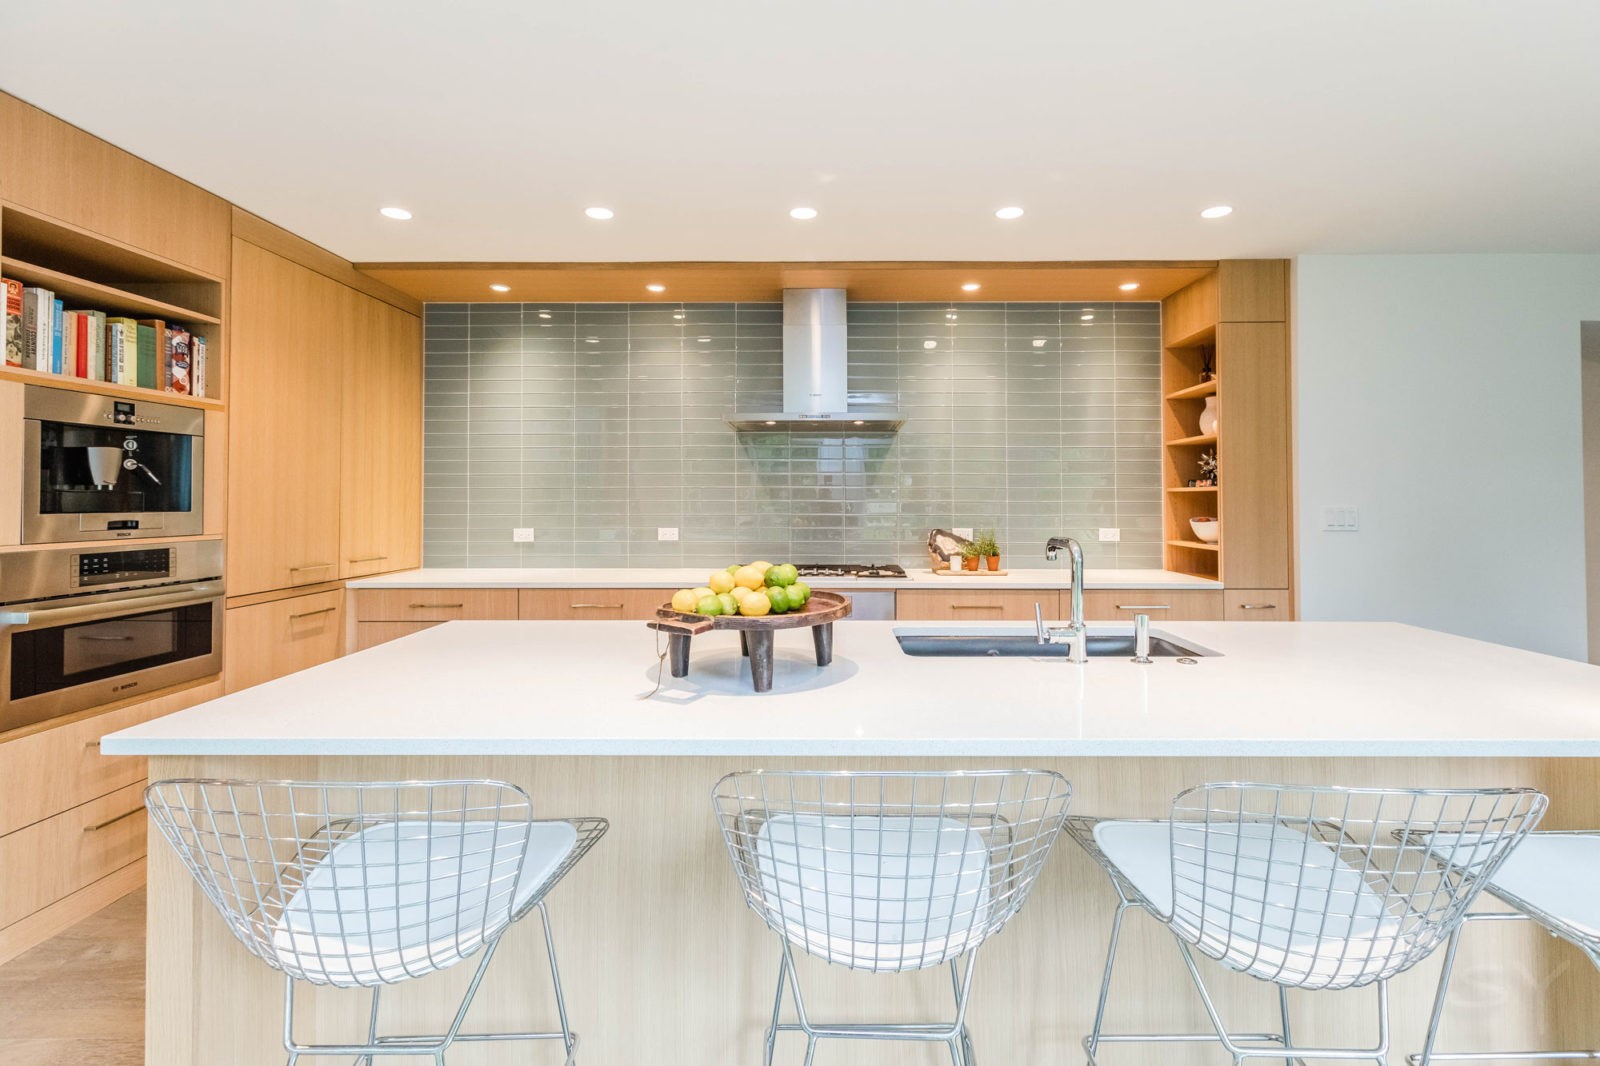 kitchen with large island white countertops and bar seating subway tile backsplash and hooded vent